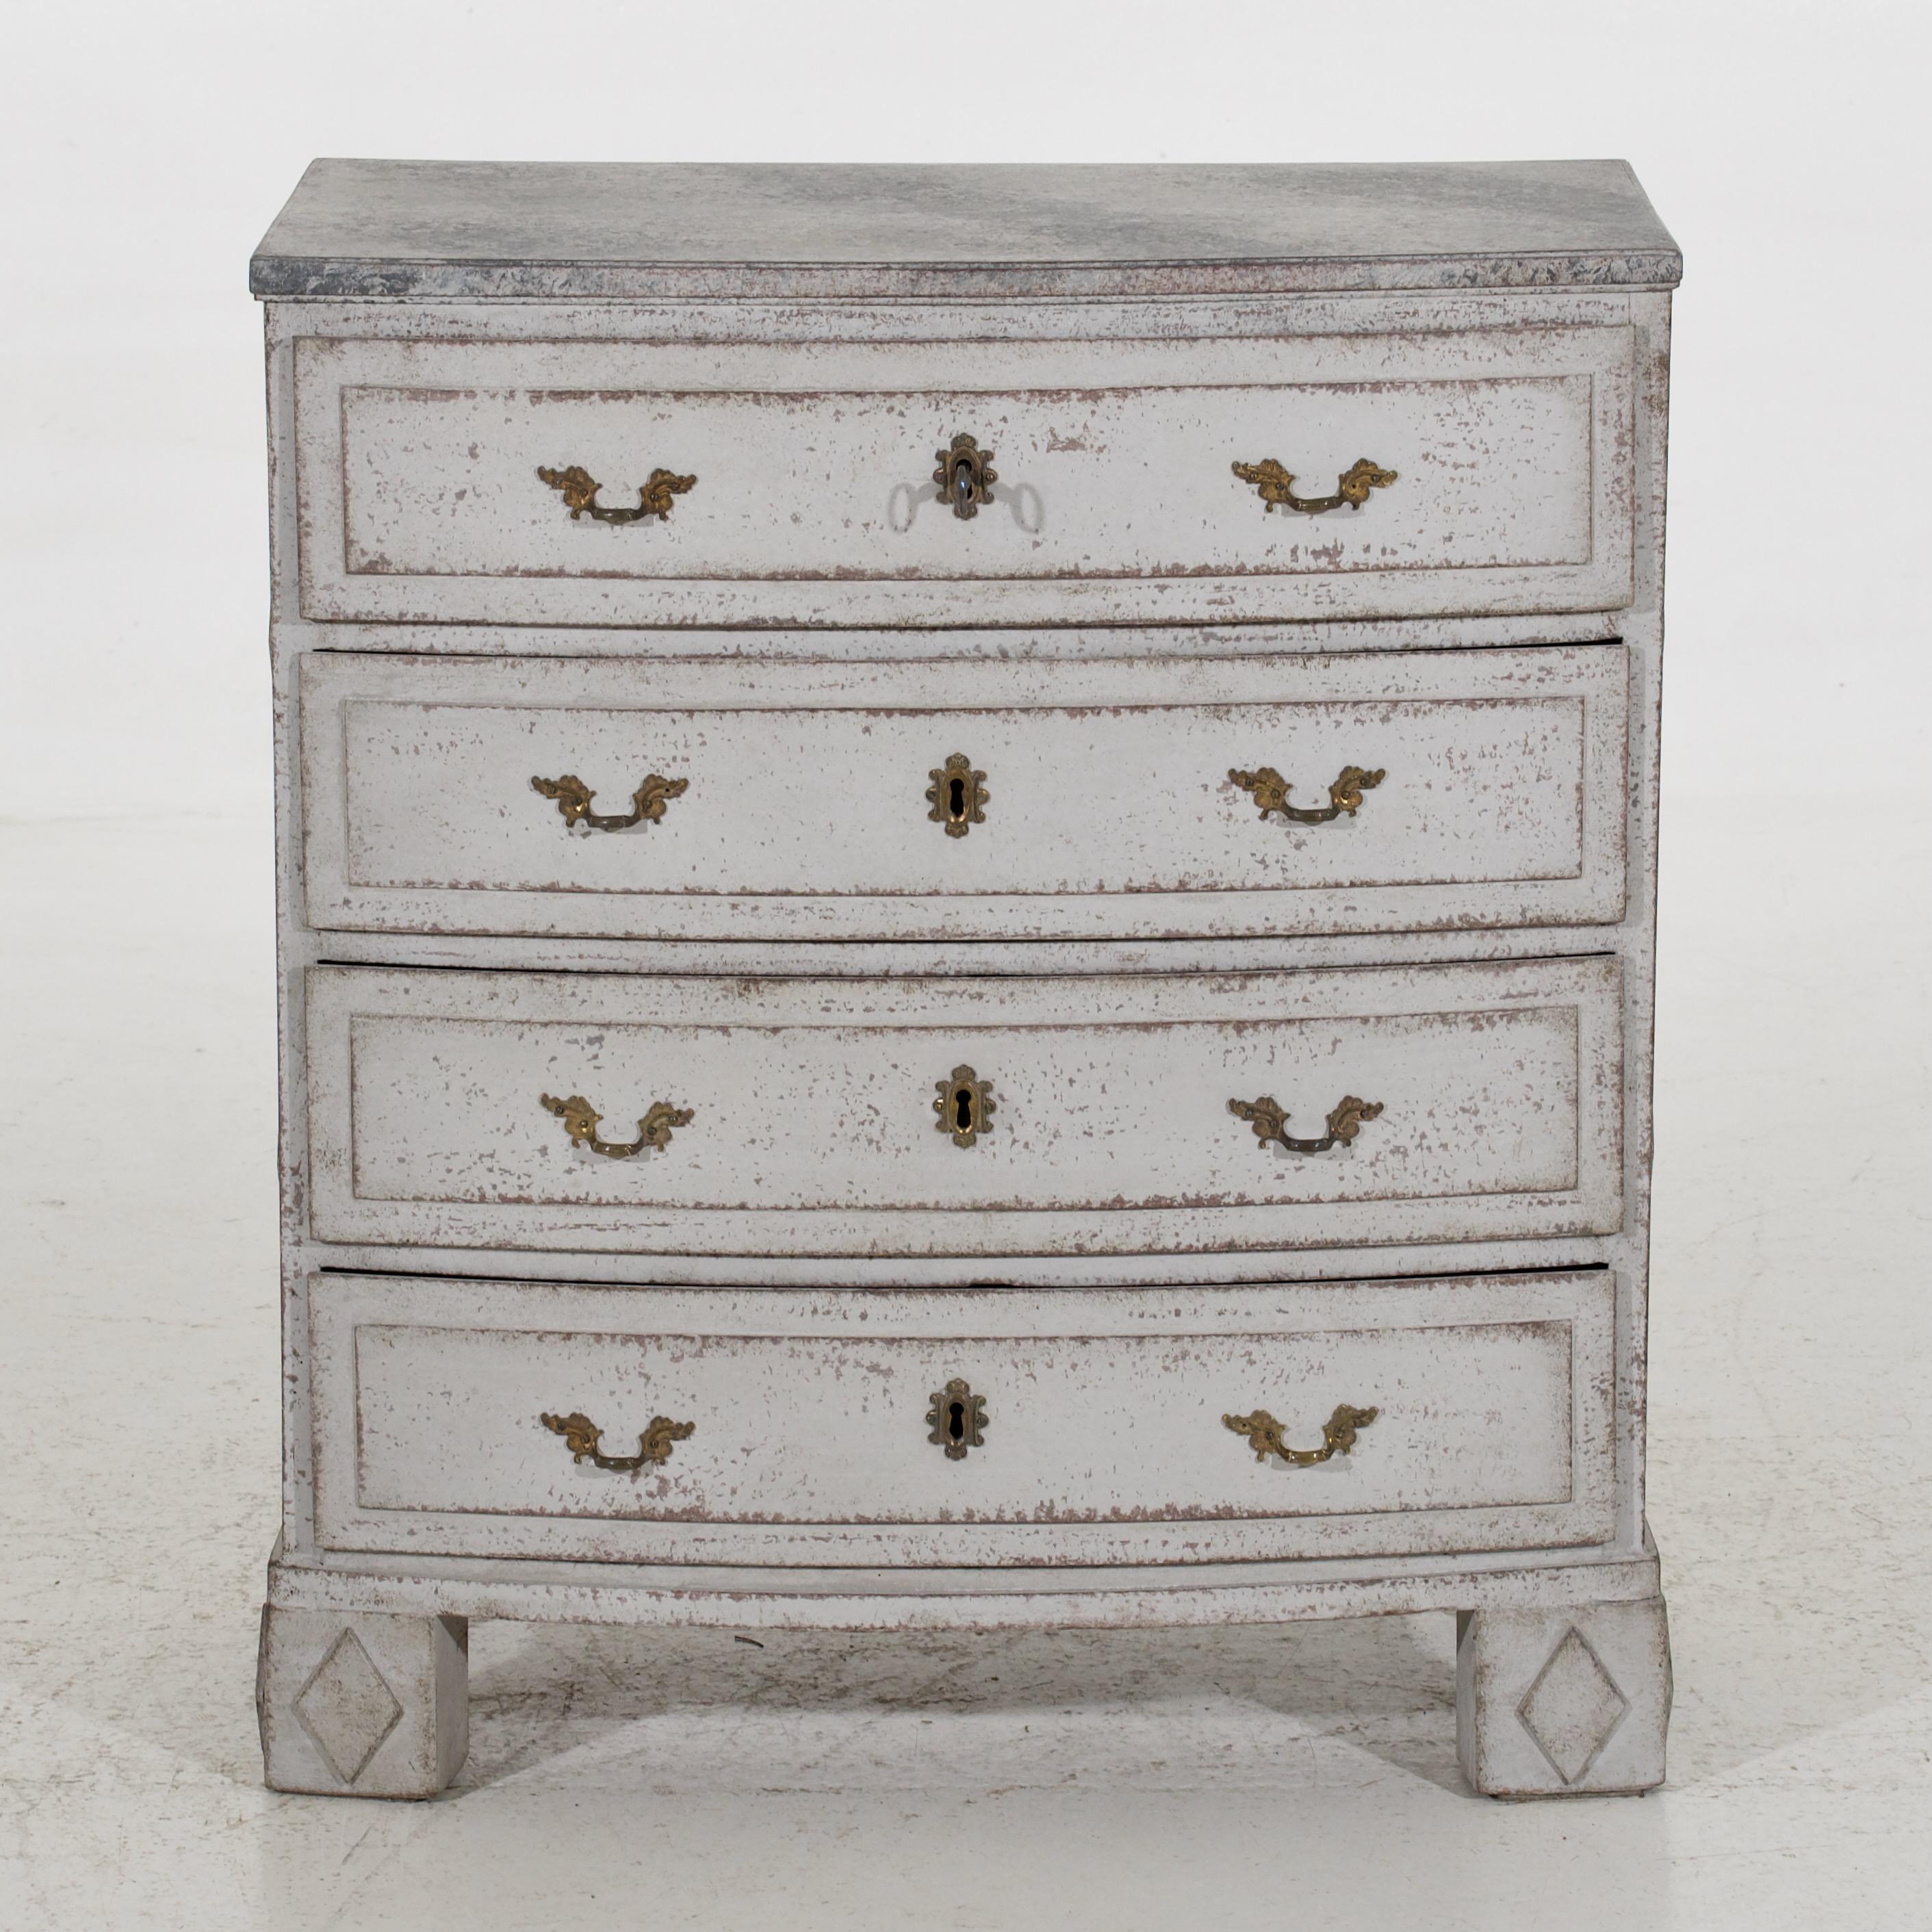 This stunning Scandinavian chest features a curved front, faux marble painted top and original locks, dating back to 1810.